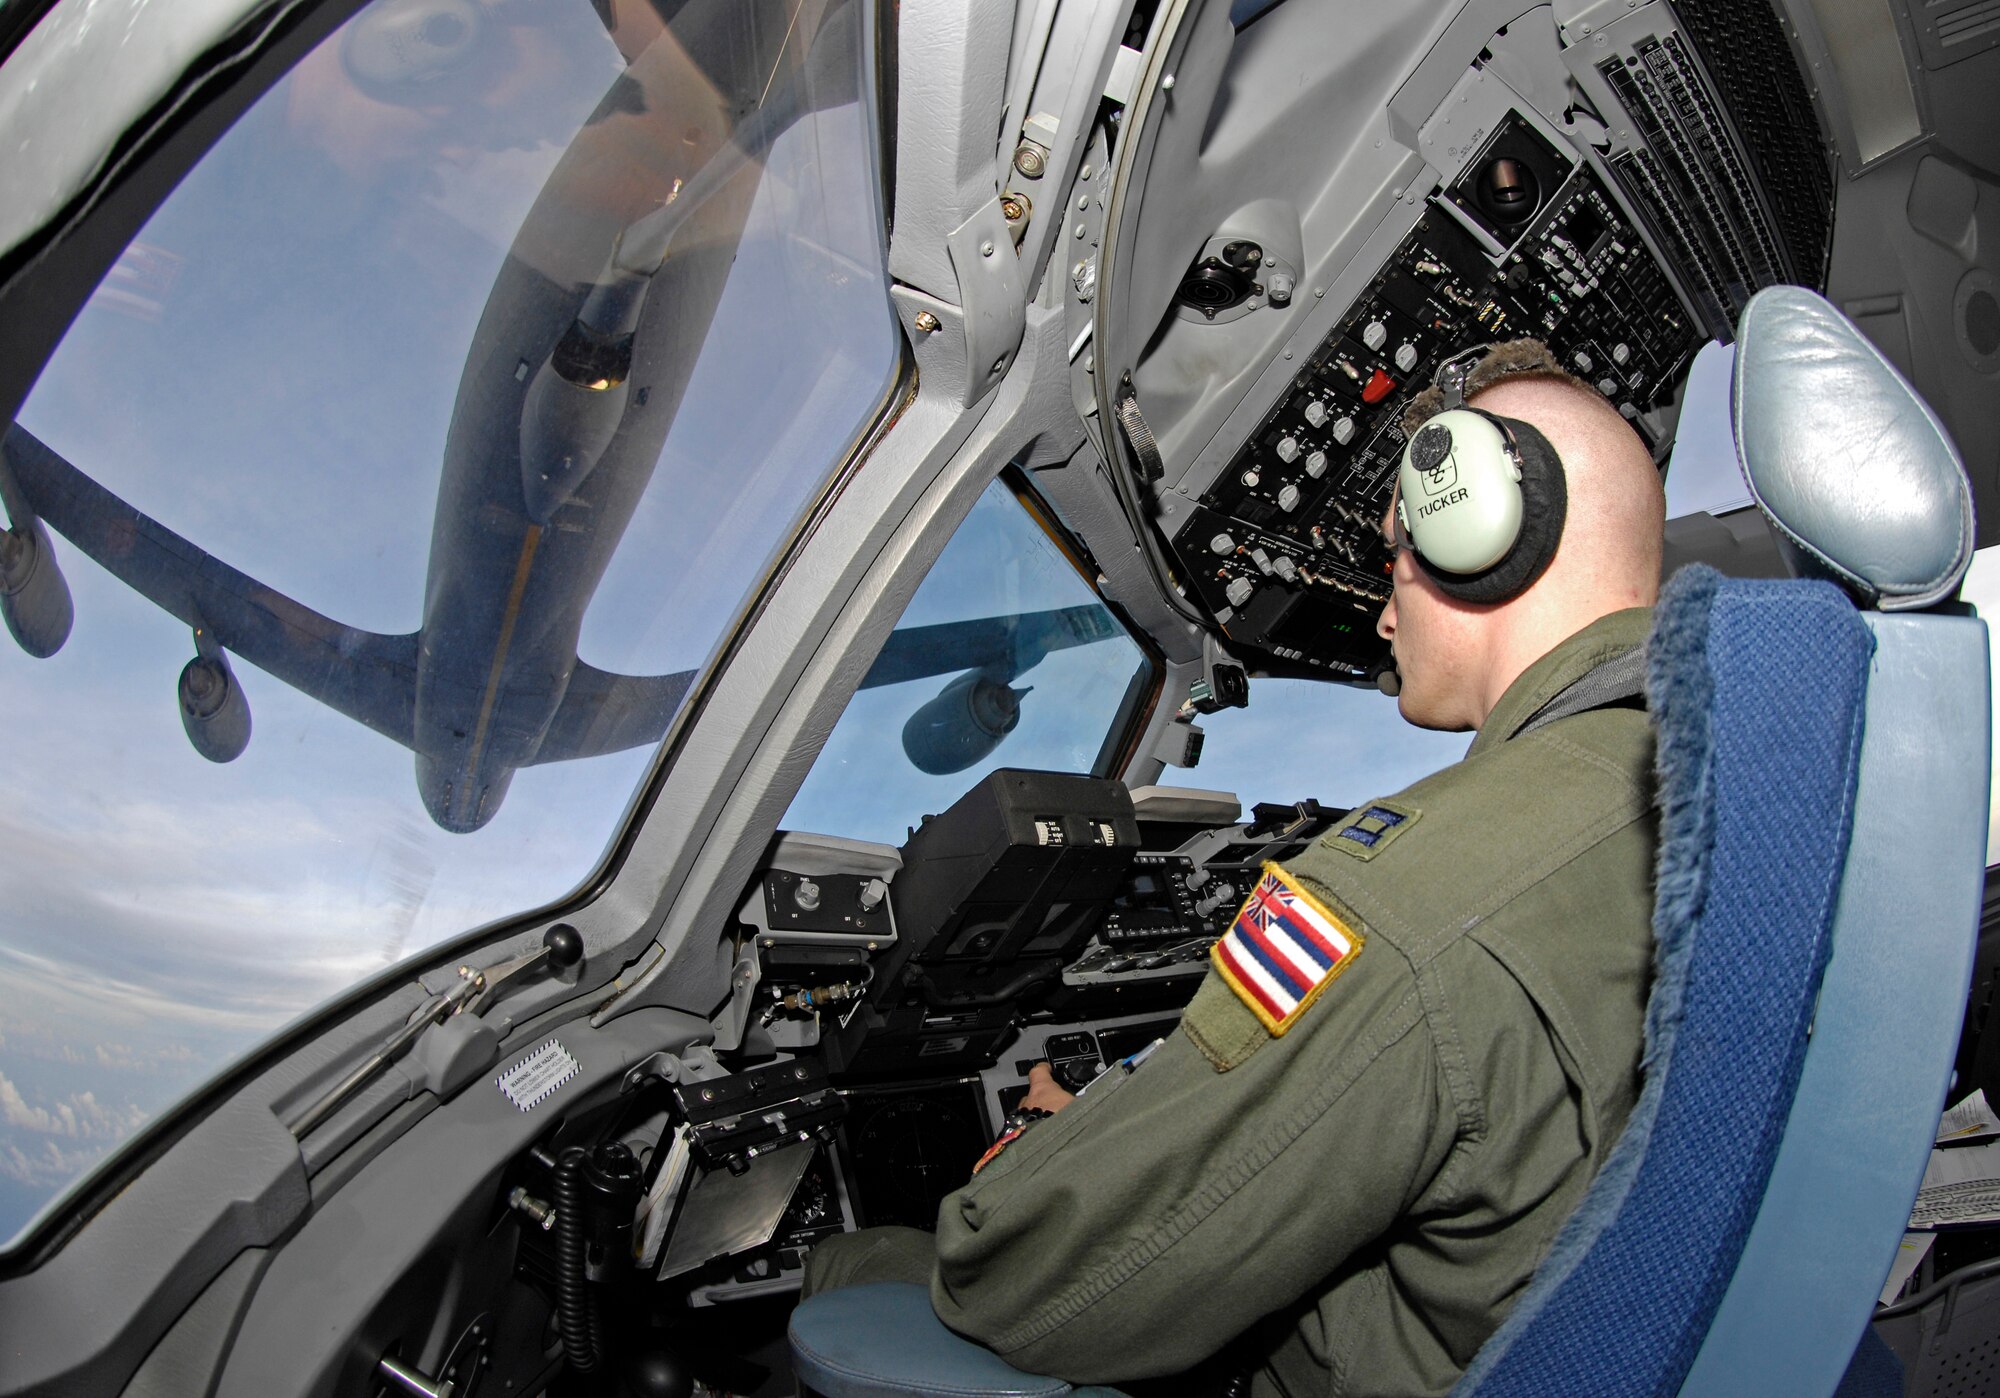 Capt. John Tucker, assigned to the Hawaii Air National Guard's 204th Airlift Squadron at Hickam Air Force Base, Hawaii, prepares to engage a C-17 Globemaster III in aerial refueling with a KC-135 from the 909th Air Refueling Squadron out of Kadena Air Base, Japan, while en route to China May 17, 2008. A U.S. Pacific Command mission employed one C-17 from the 15th Airlift Wing at Hickam and another from the 3rd Wing at Elmendorf Air Force Base, Alaska, to deliver nearly 200,000 pounds of cargo in the wake of a devastating earthquake. (US Air Force photo/Tech. Sgt. Chris Vadnais)